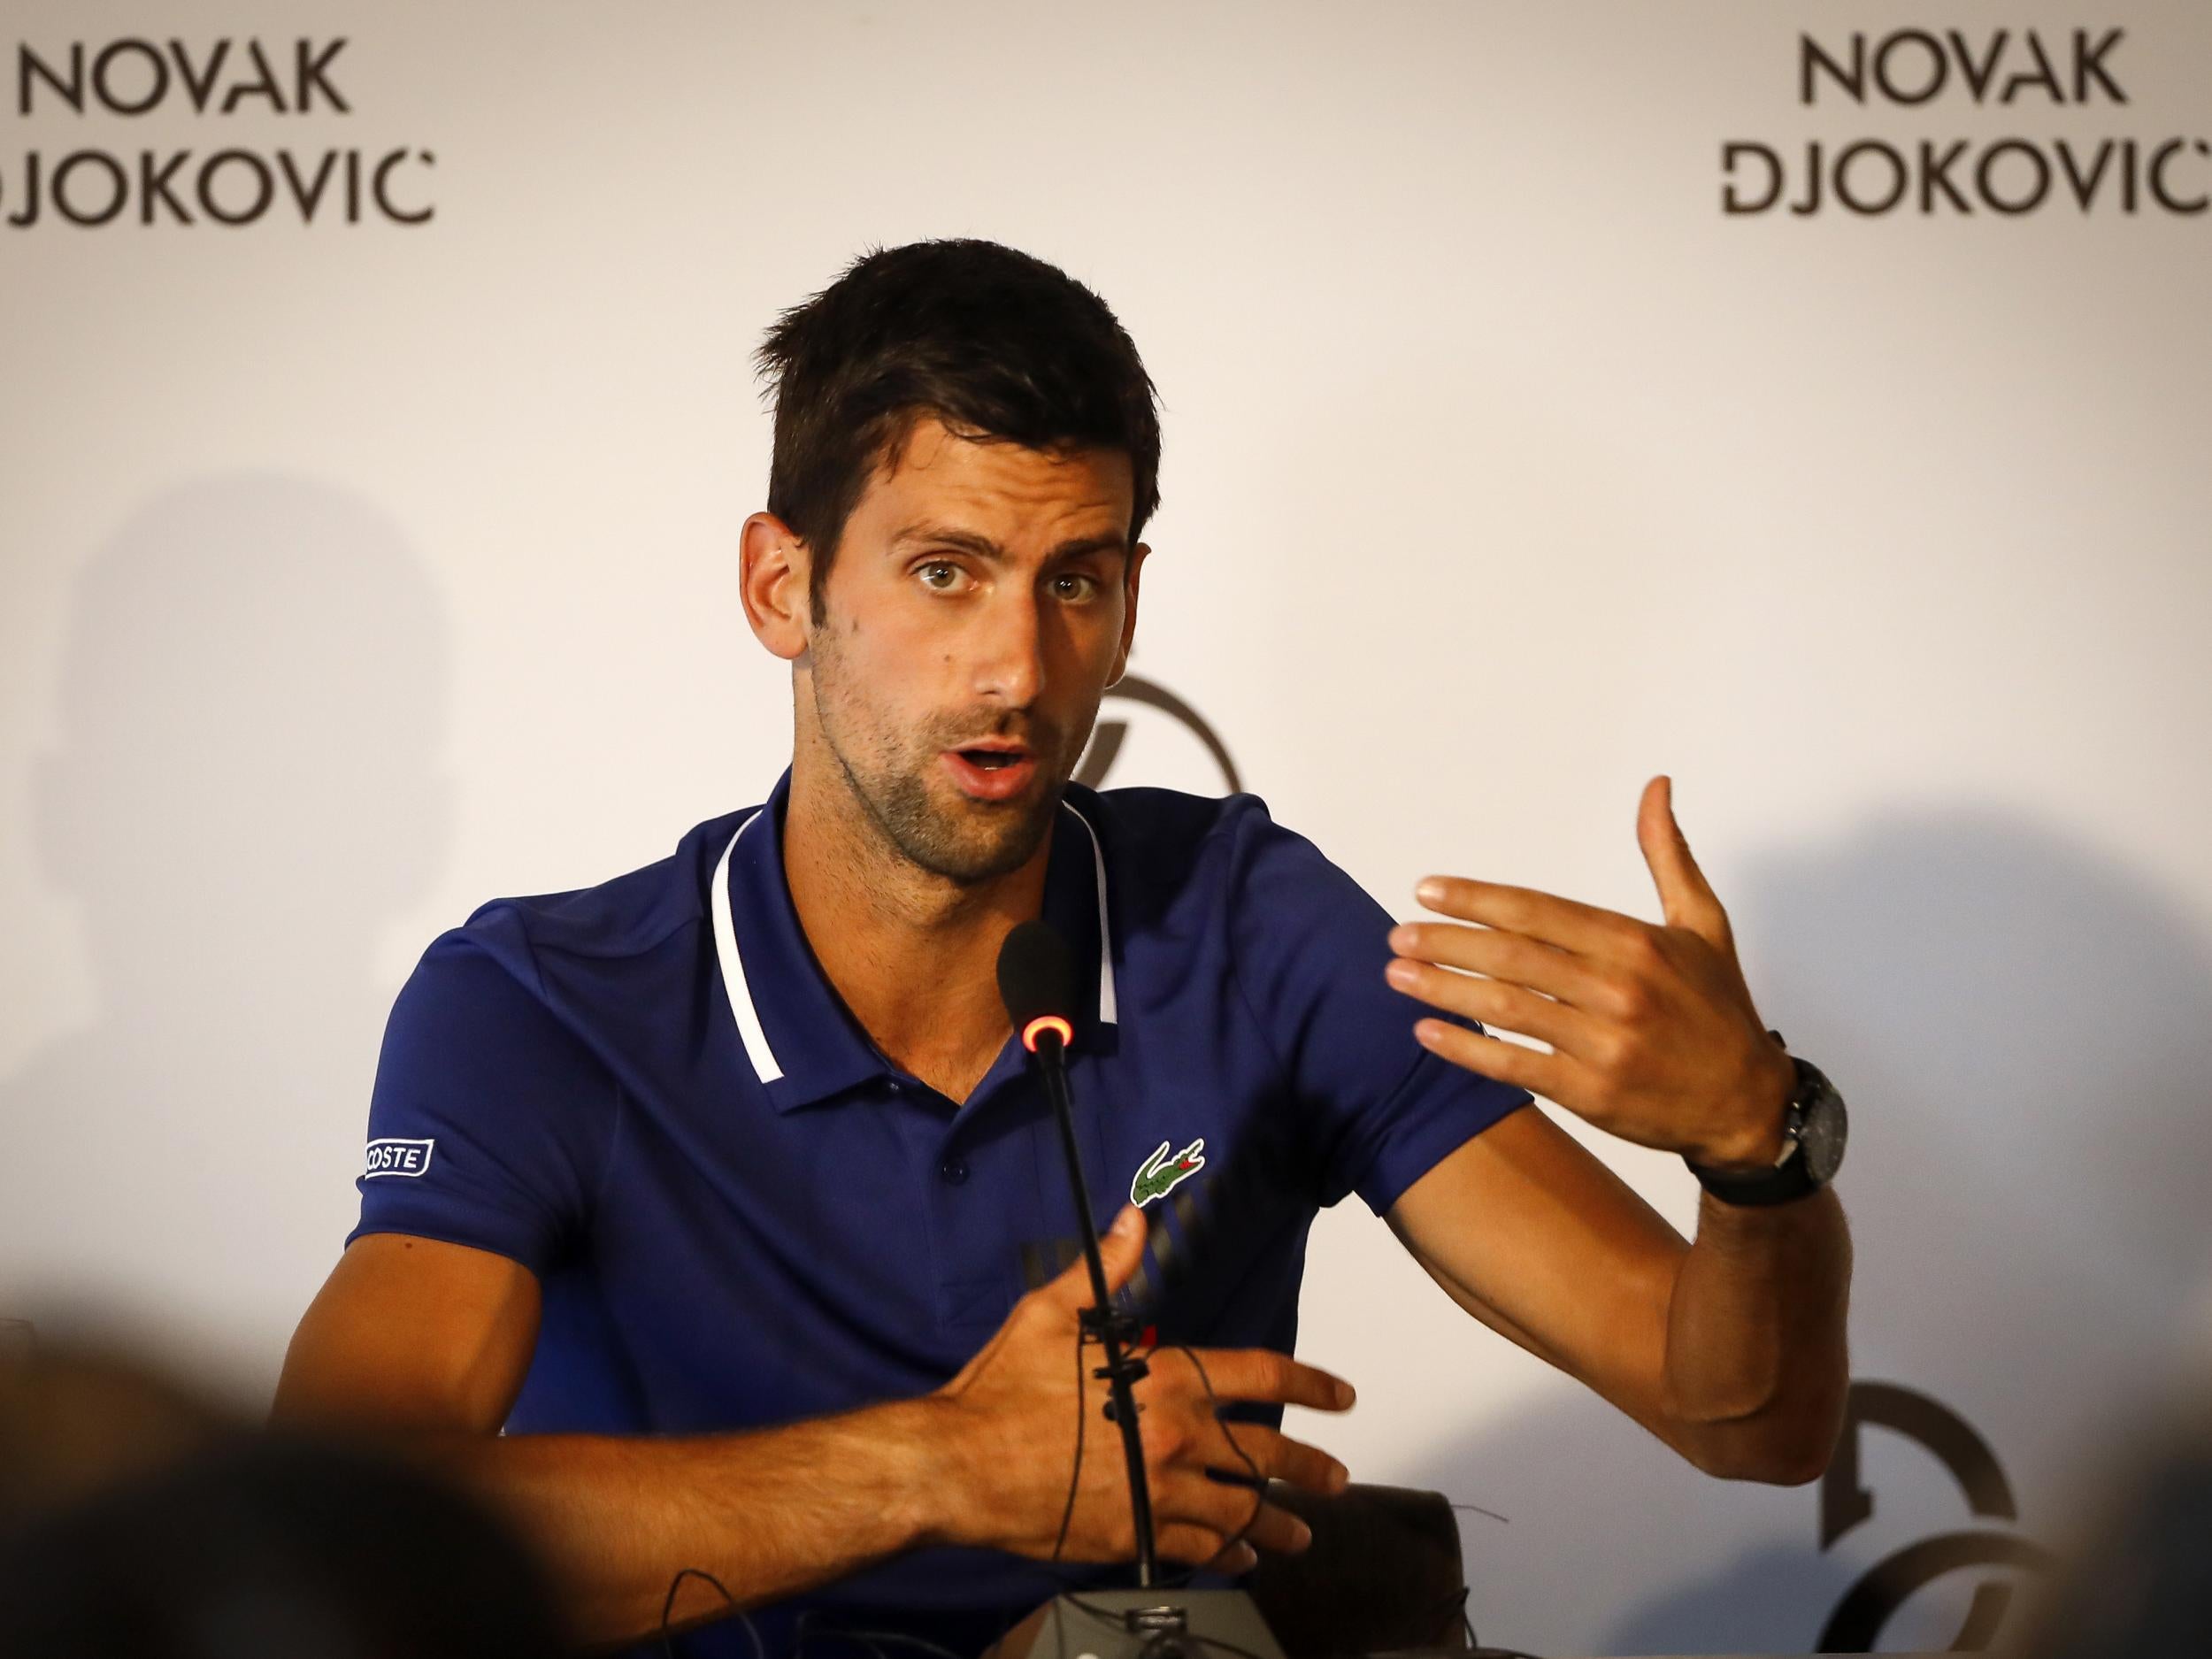 Djokovic is looking forward to playing without pressure next season